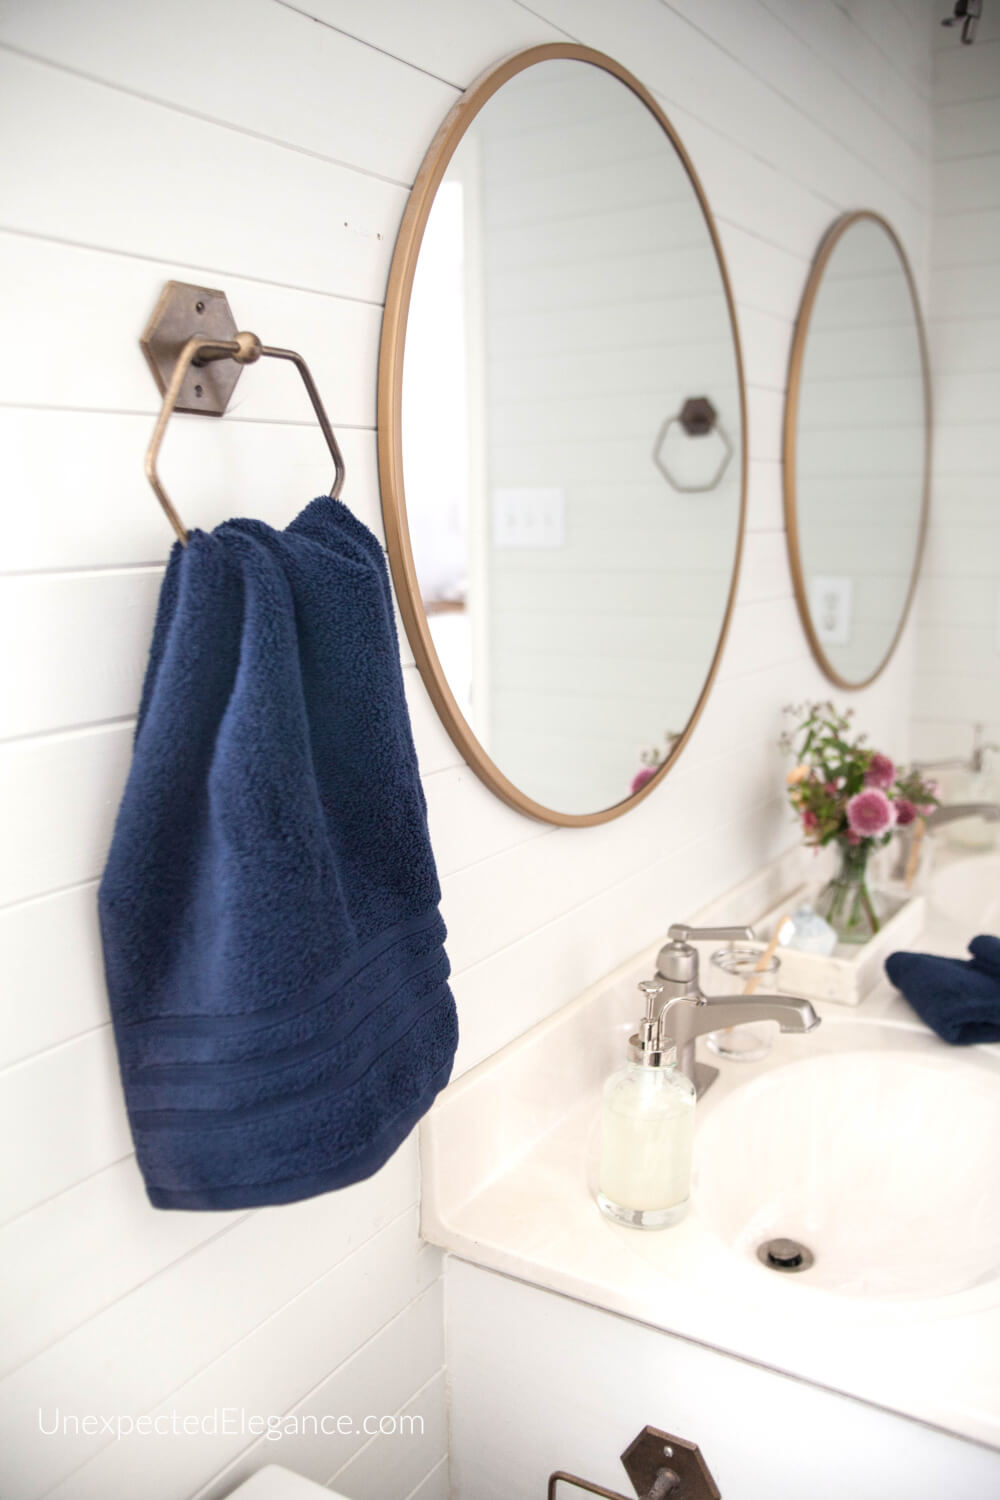 5 Inexpensive Ways To Update A Bathroom Unexpected Elegance